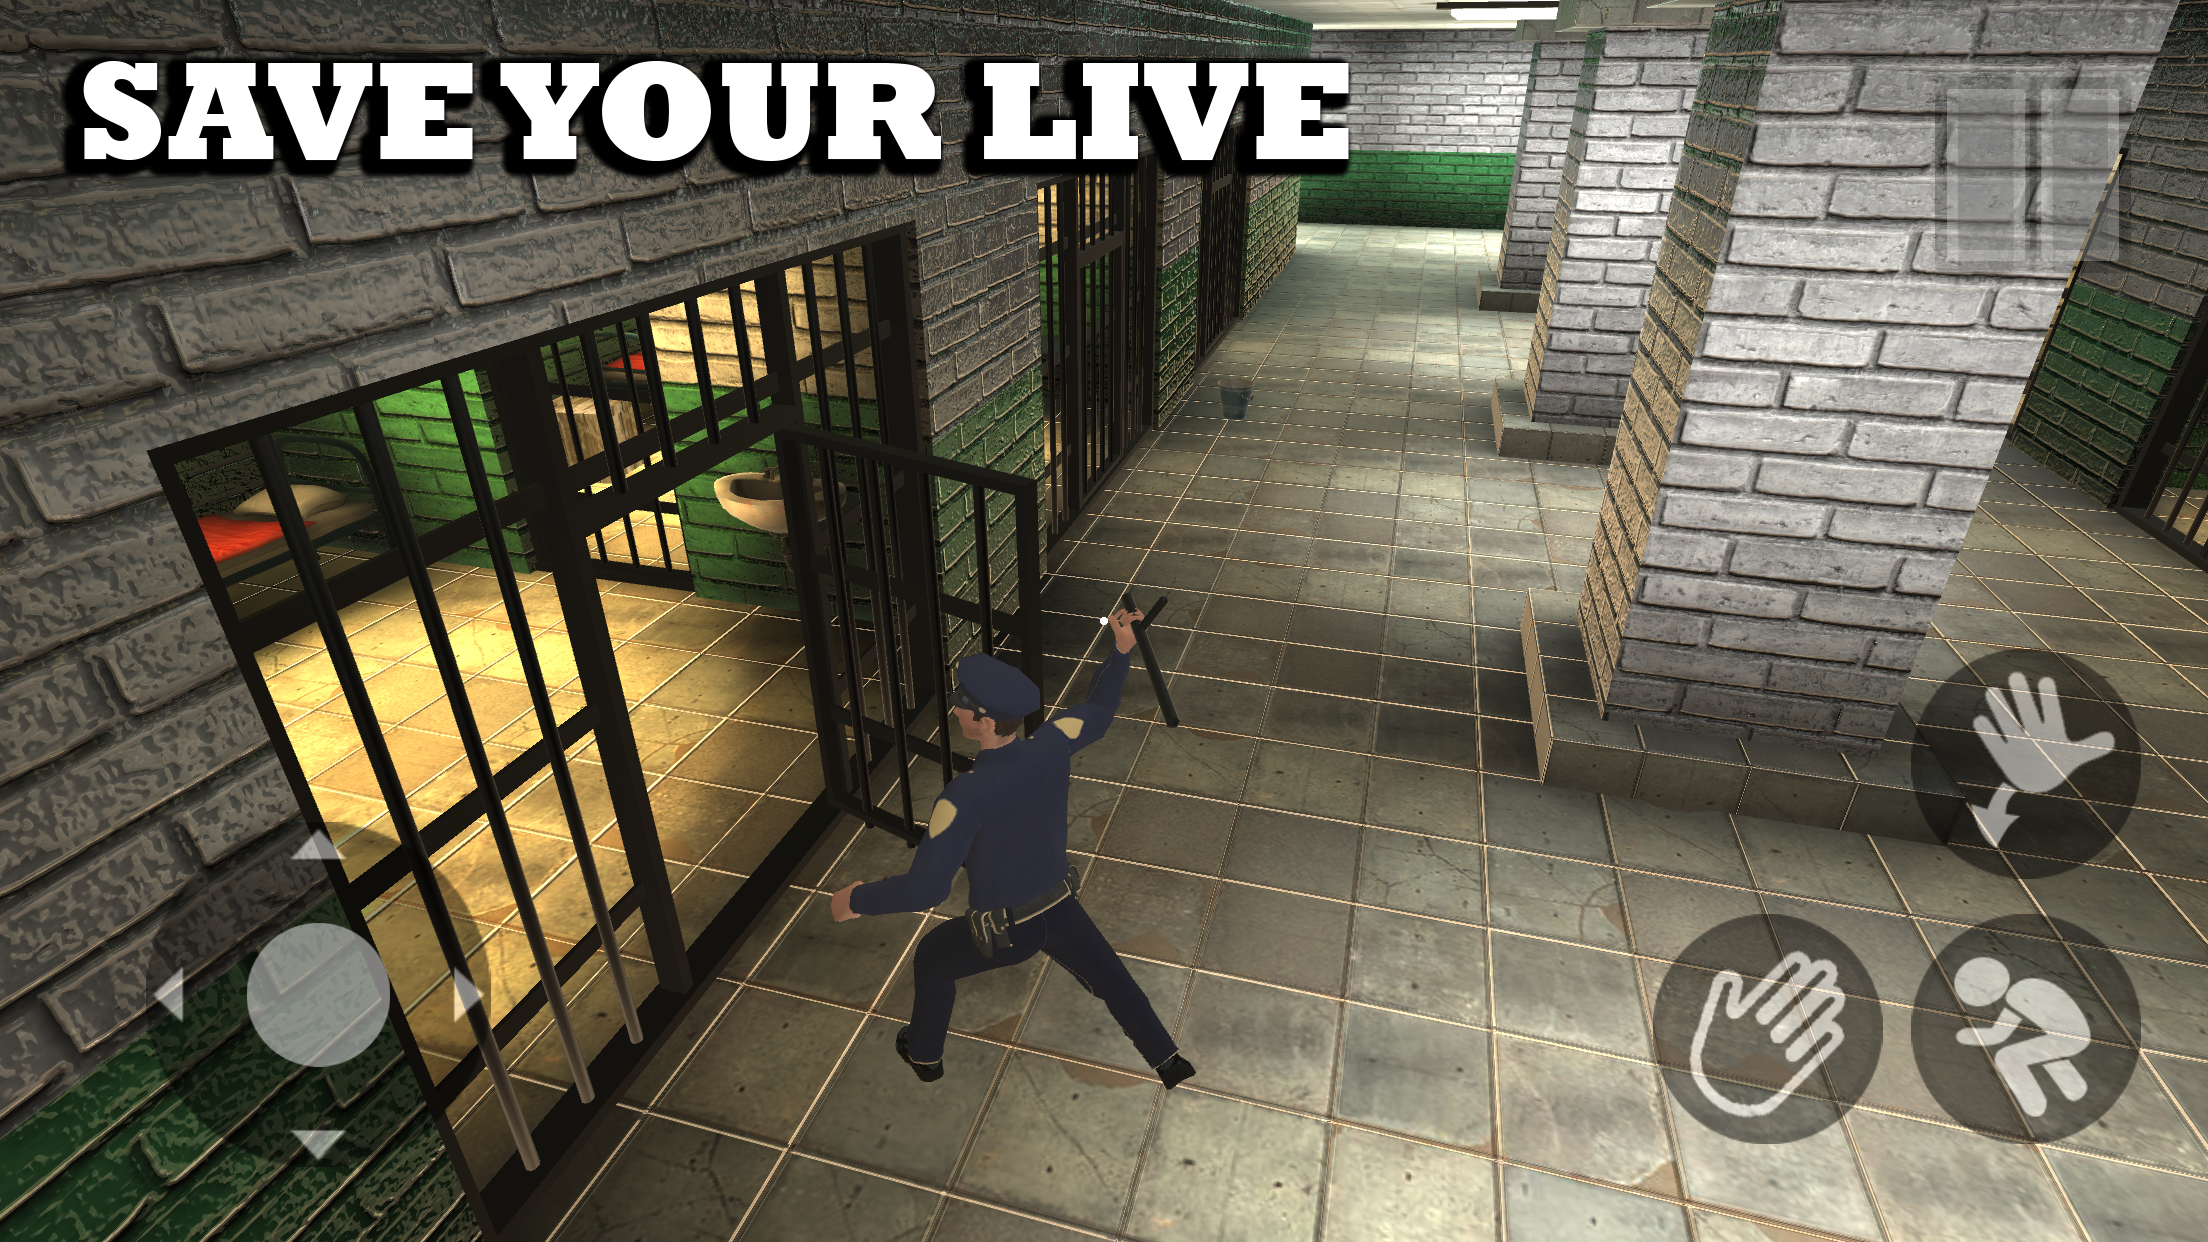 Escape the Prison APK (Android Game) - Free Download